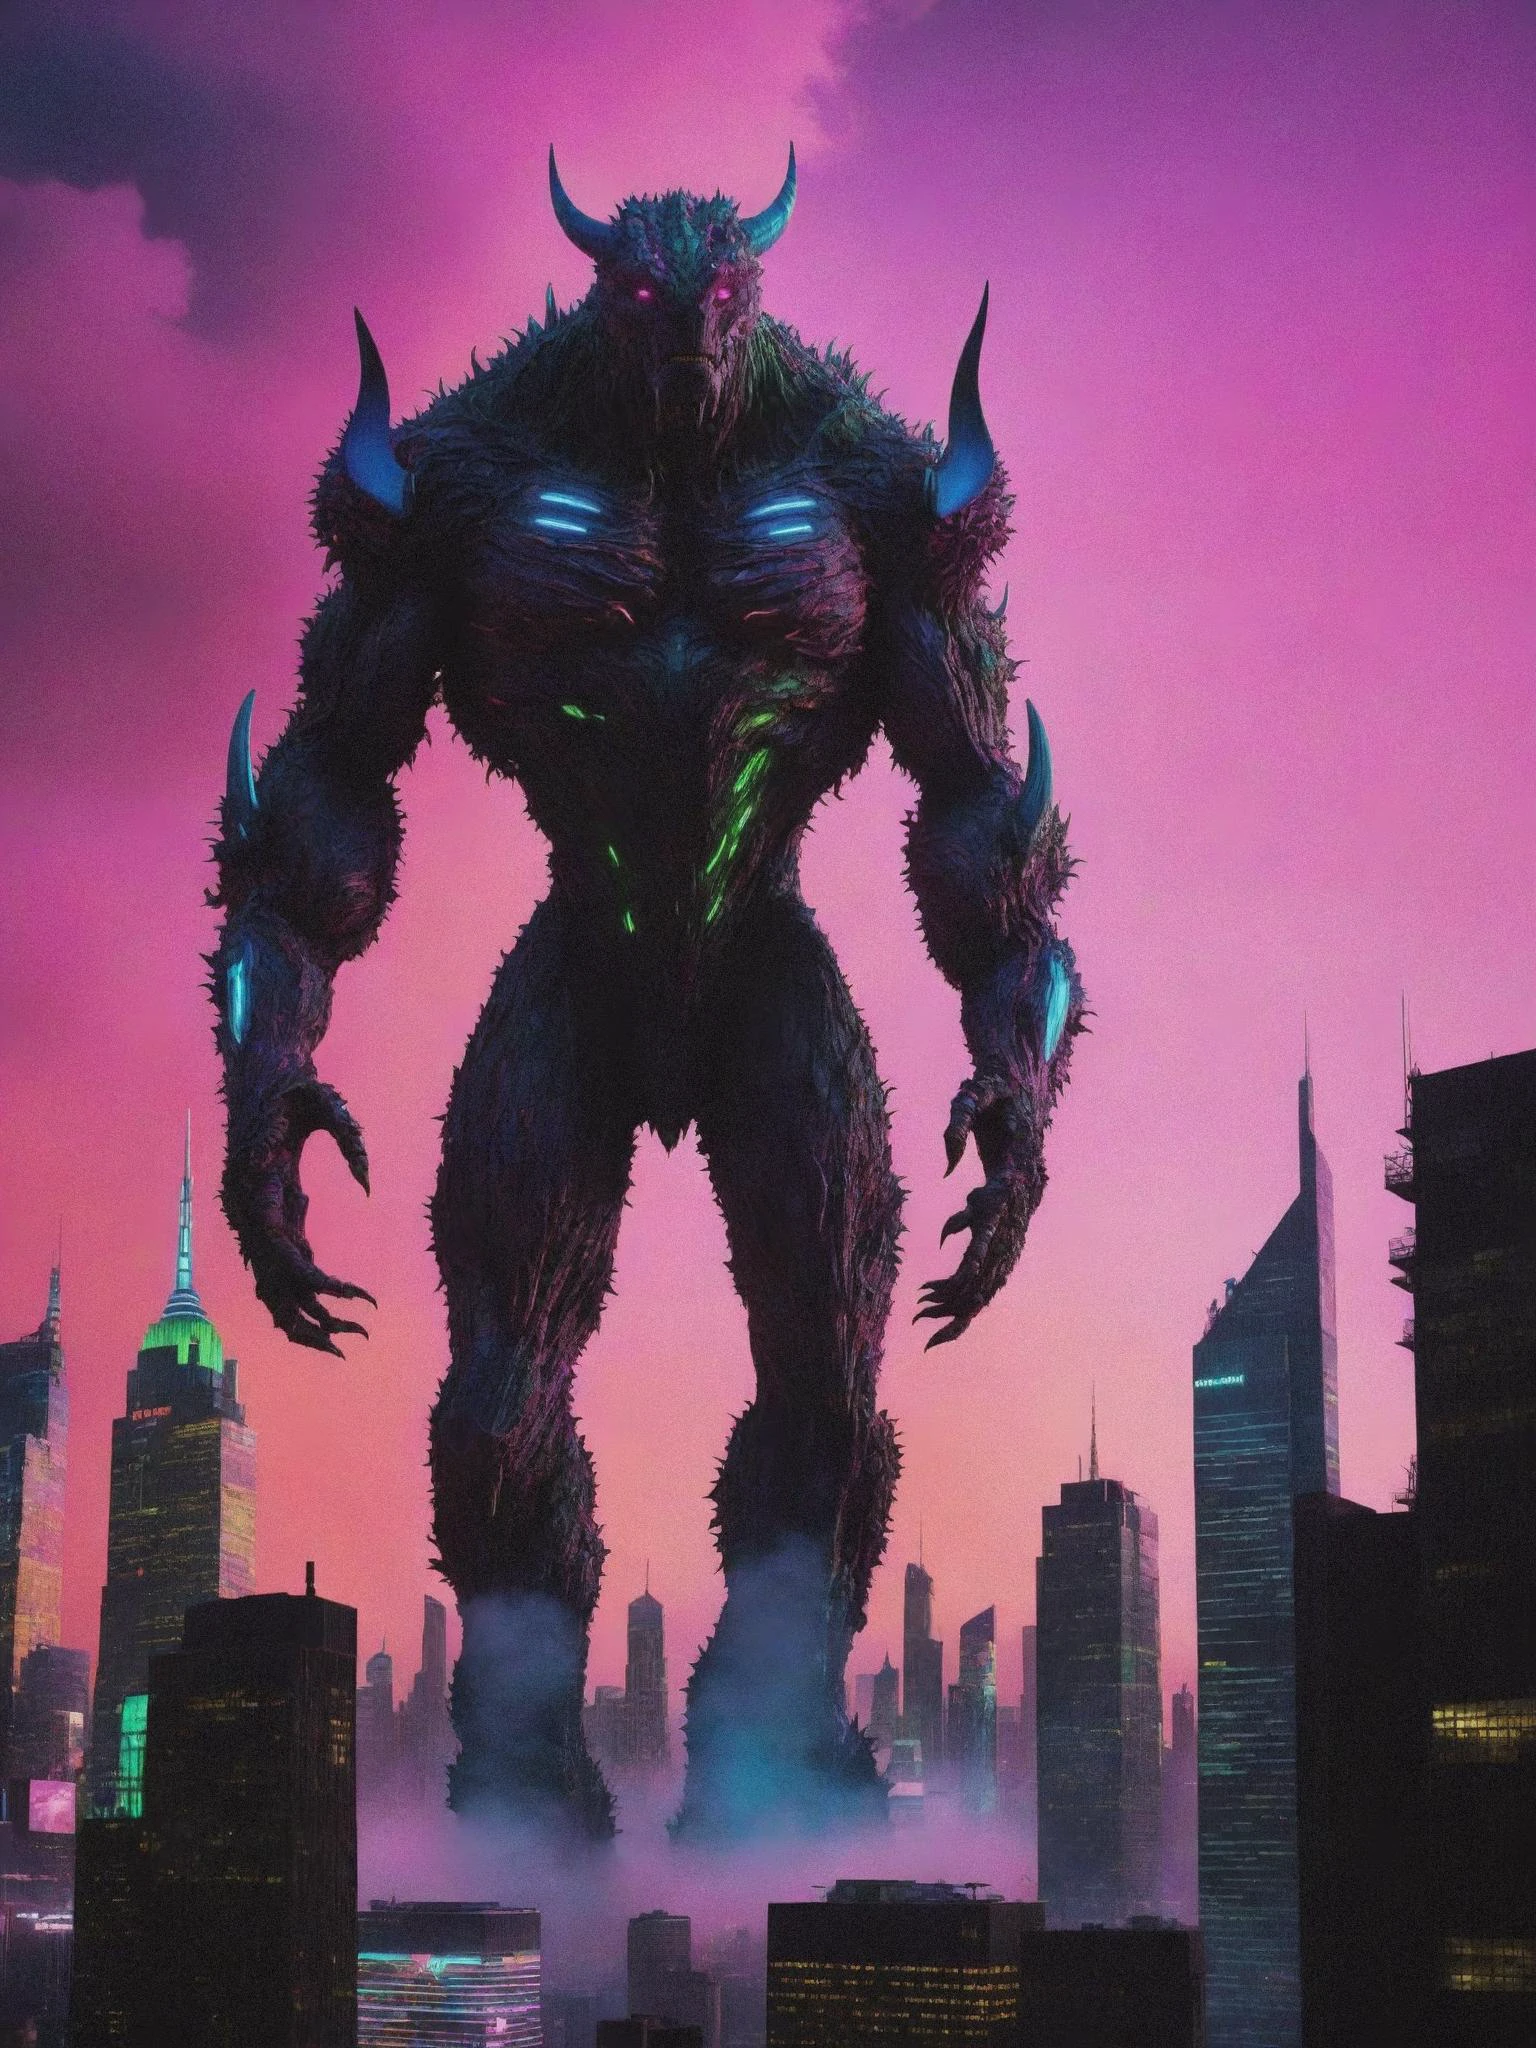 -A surreal movie scene featuring a giant, otherworldly creature towering over a futuristic cityscape. The scene is bathed in vibrant, neon colors and features intricate details and textures. , cinematic movie by Todd Phillips , Dante Spinotti